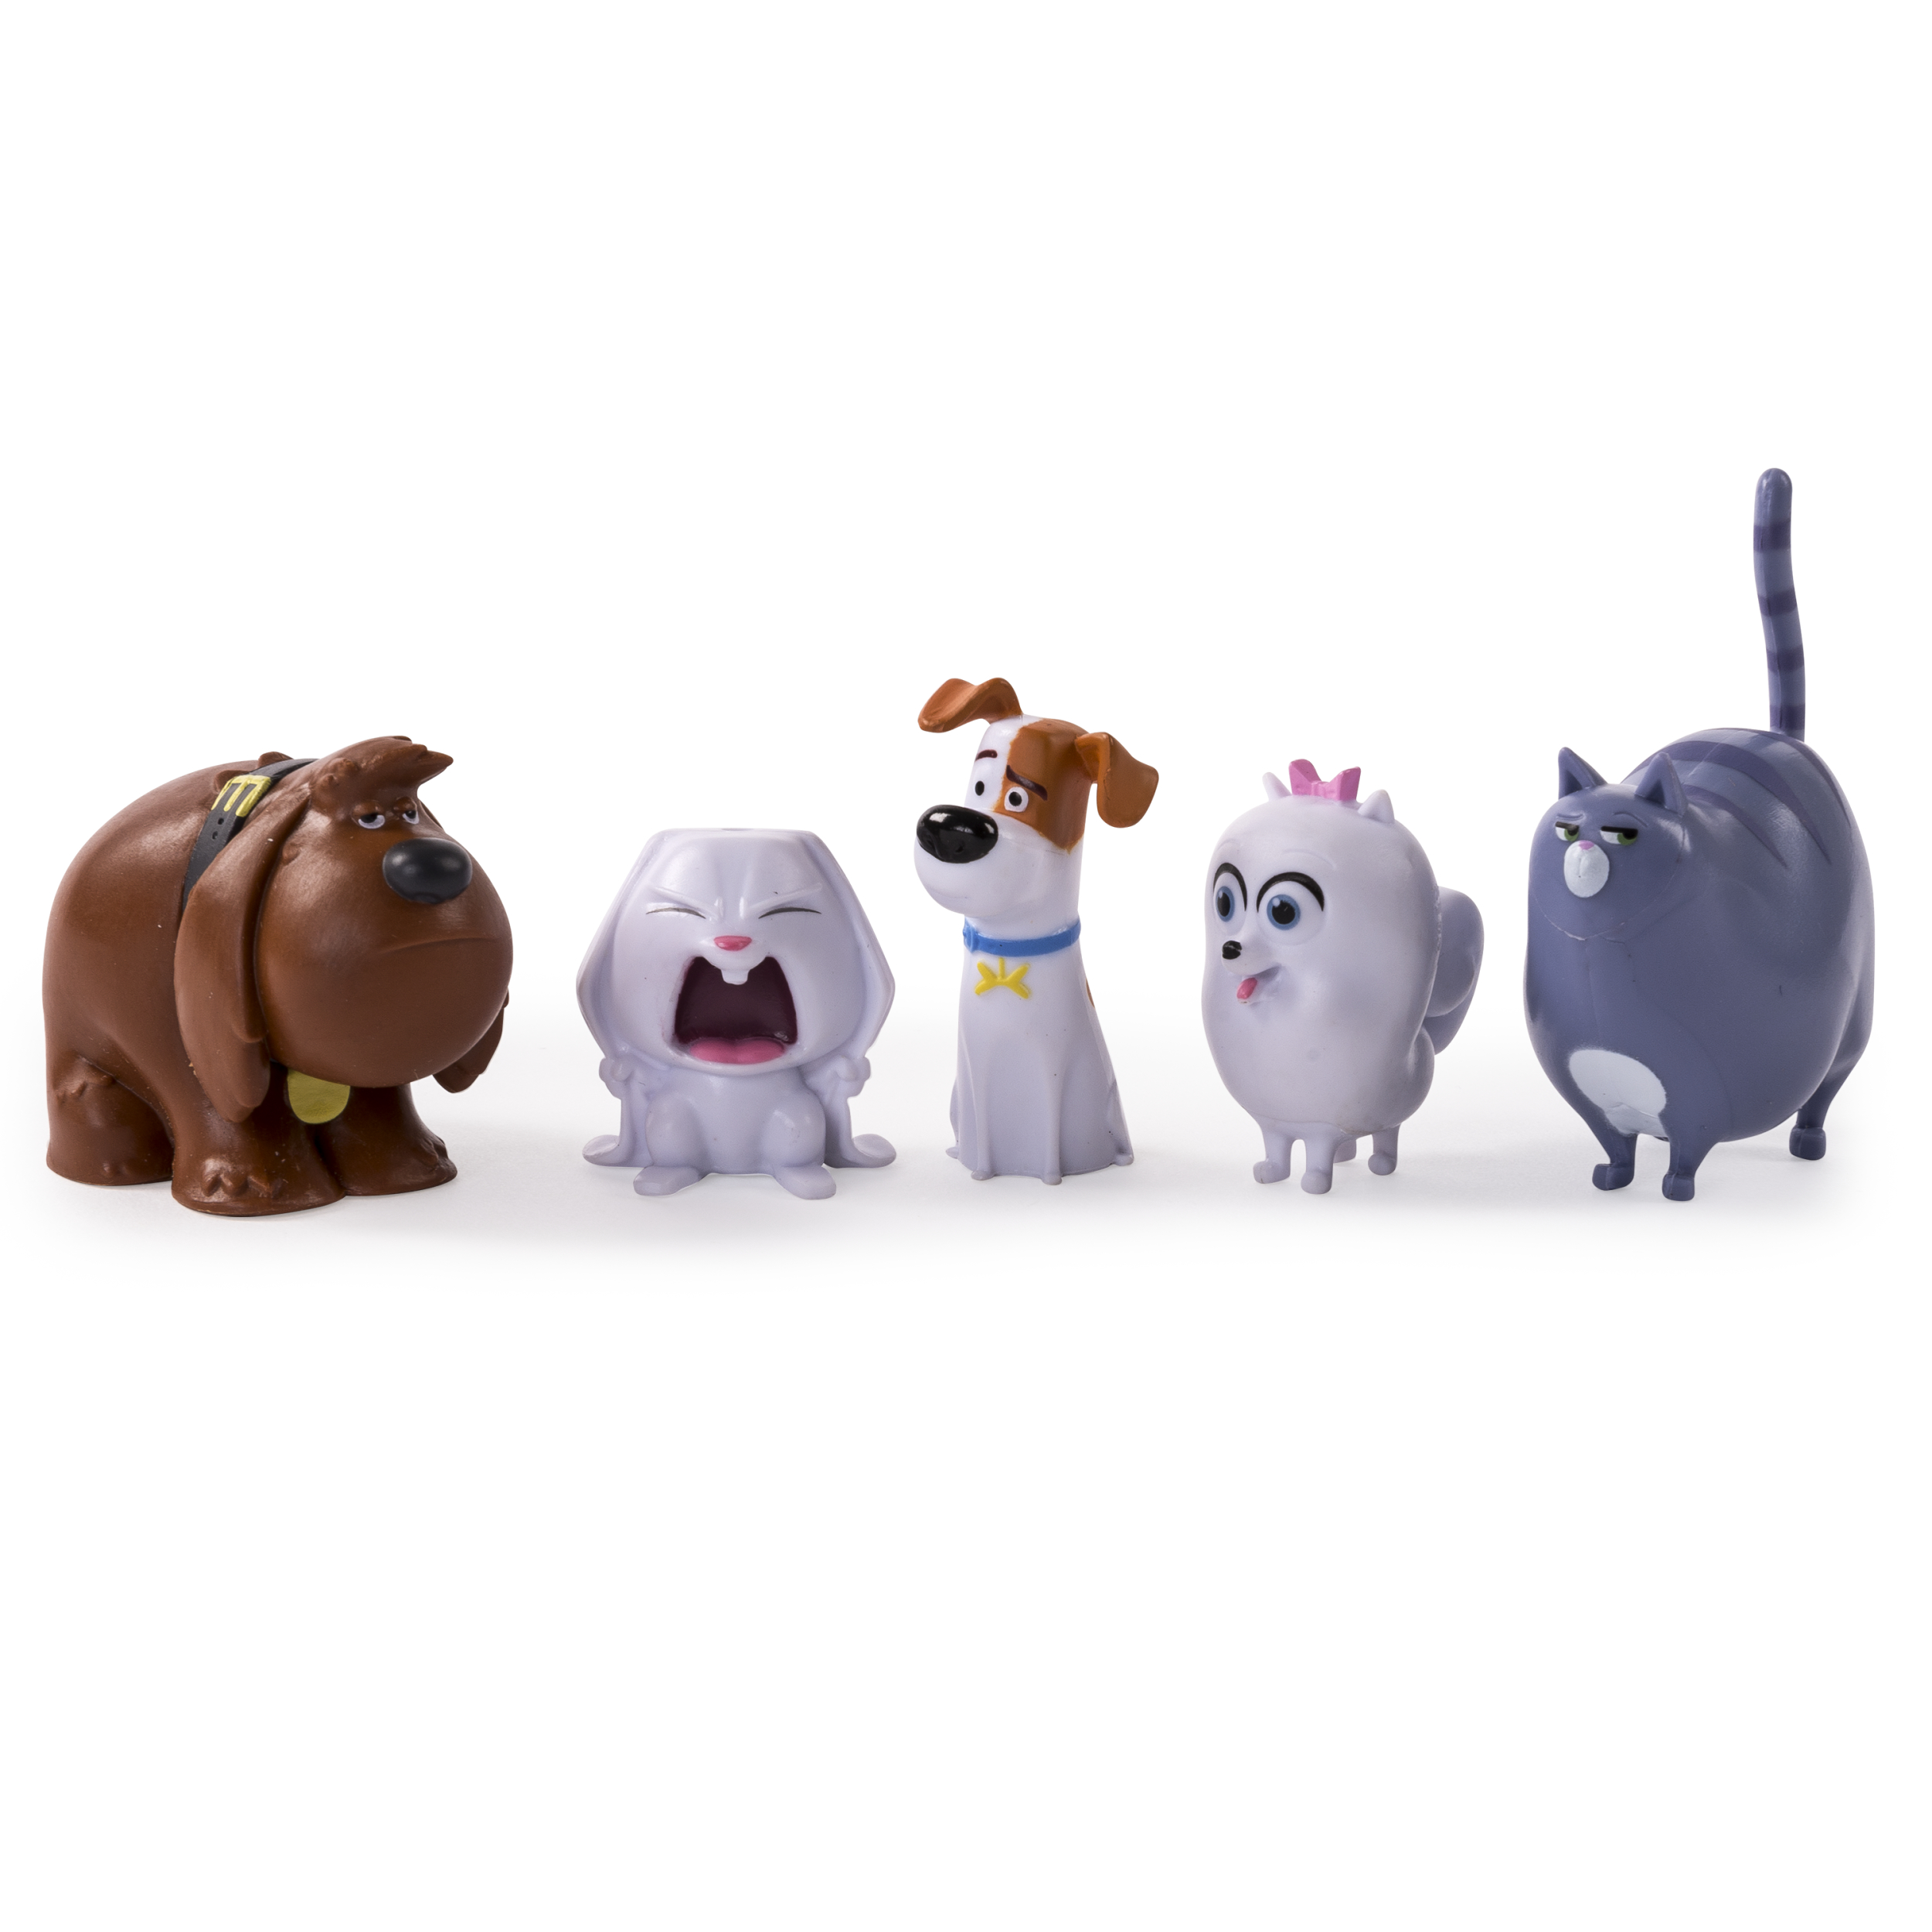 The Secret Life of Pets - Mini Pets Collectible Figures 5-Pack - image 1 of 3